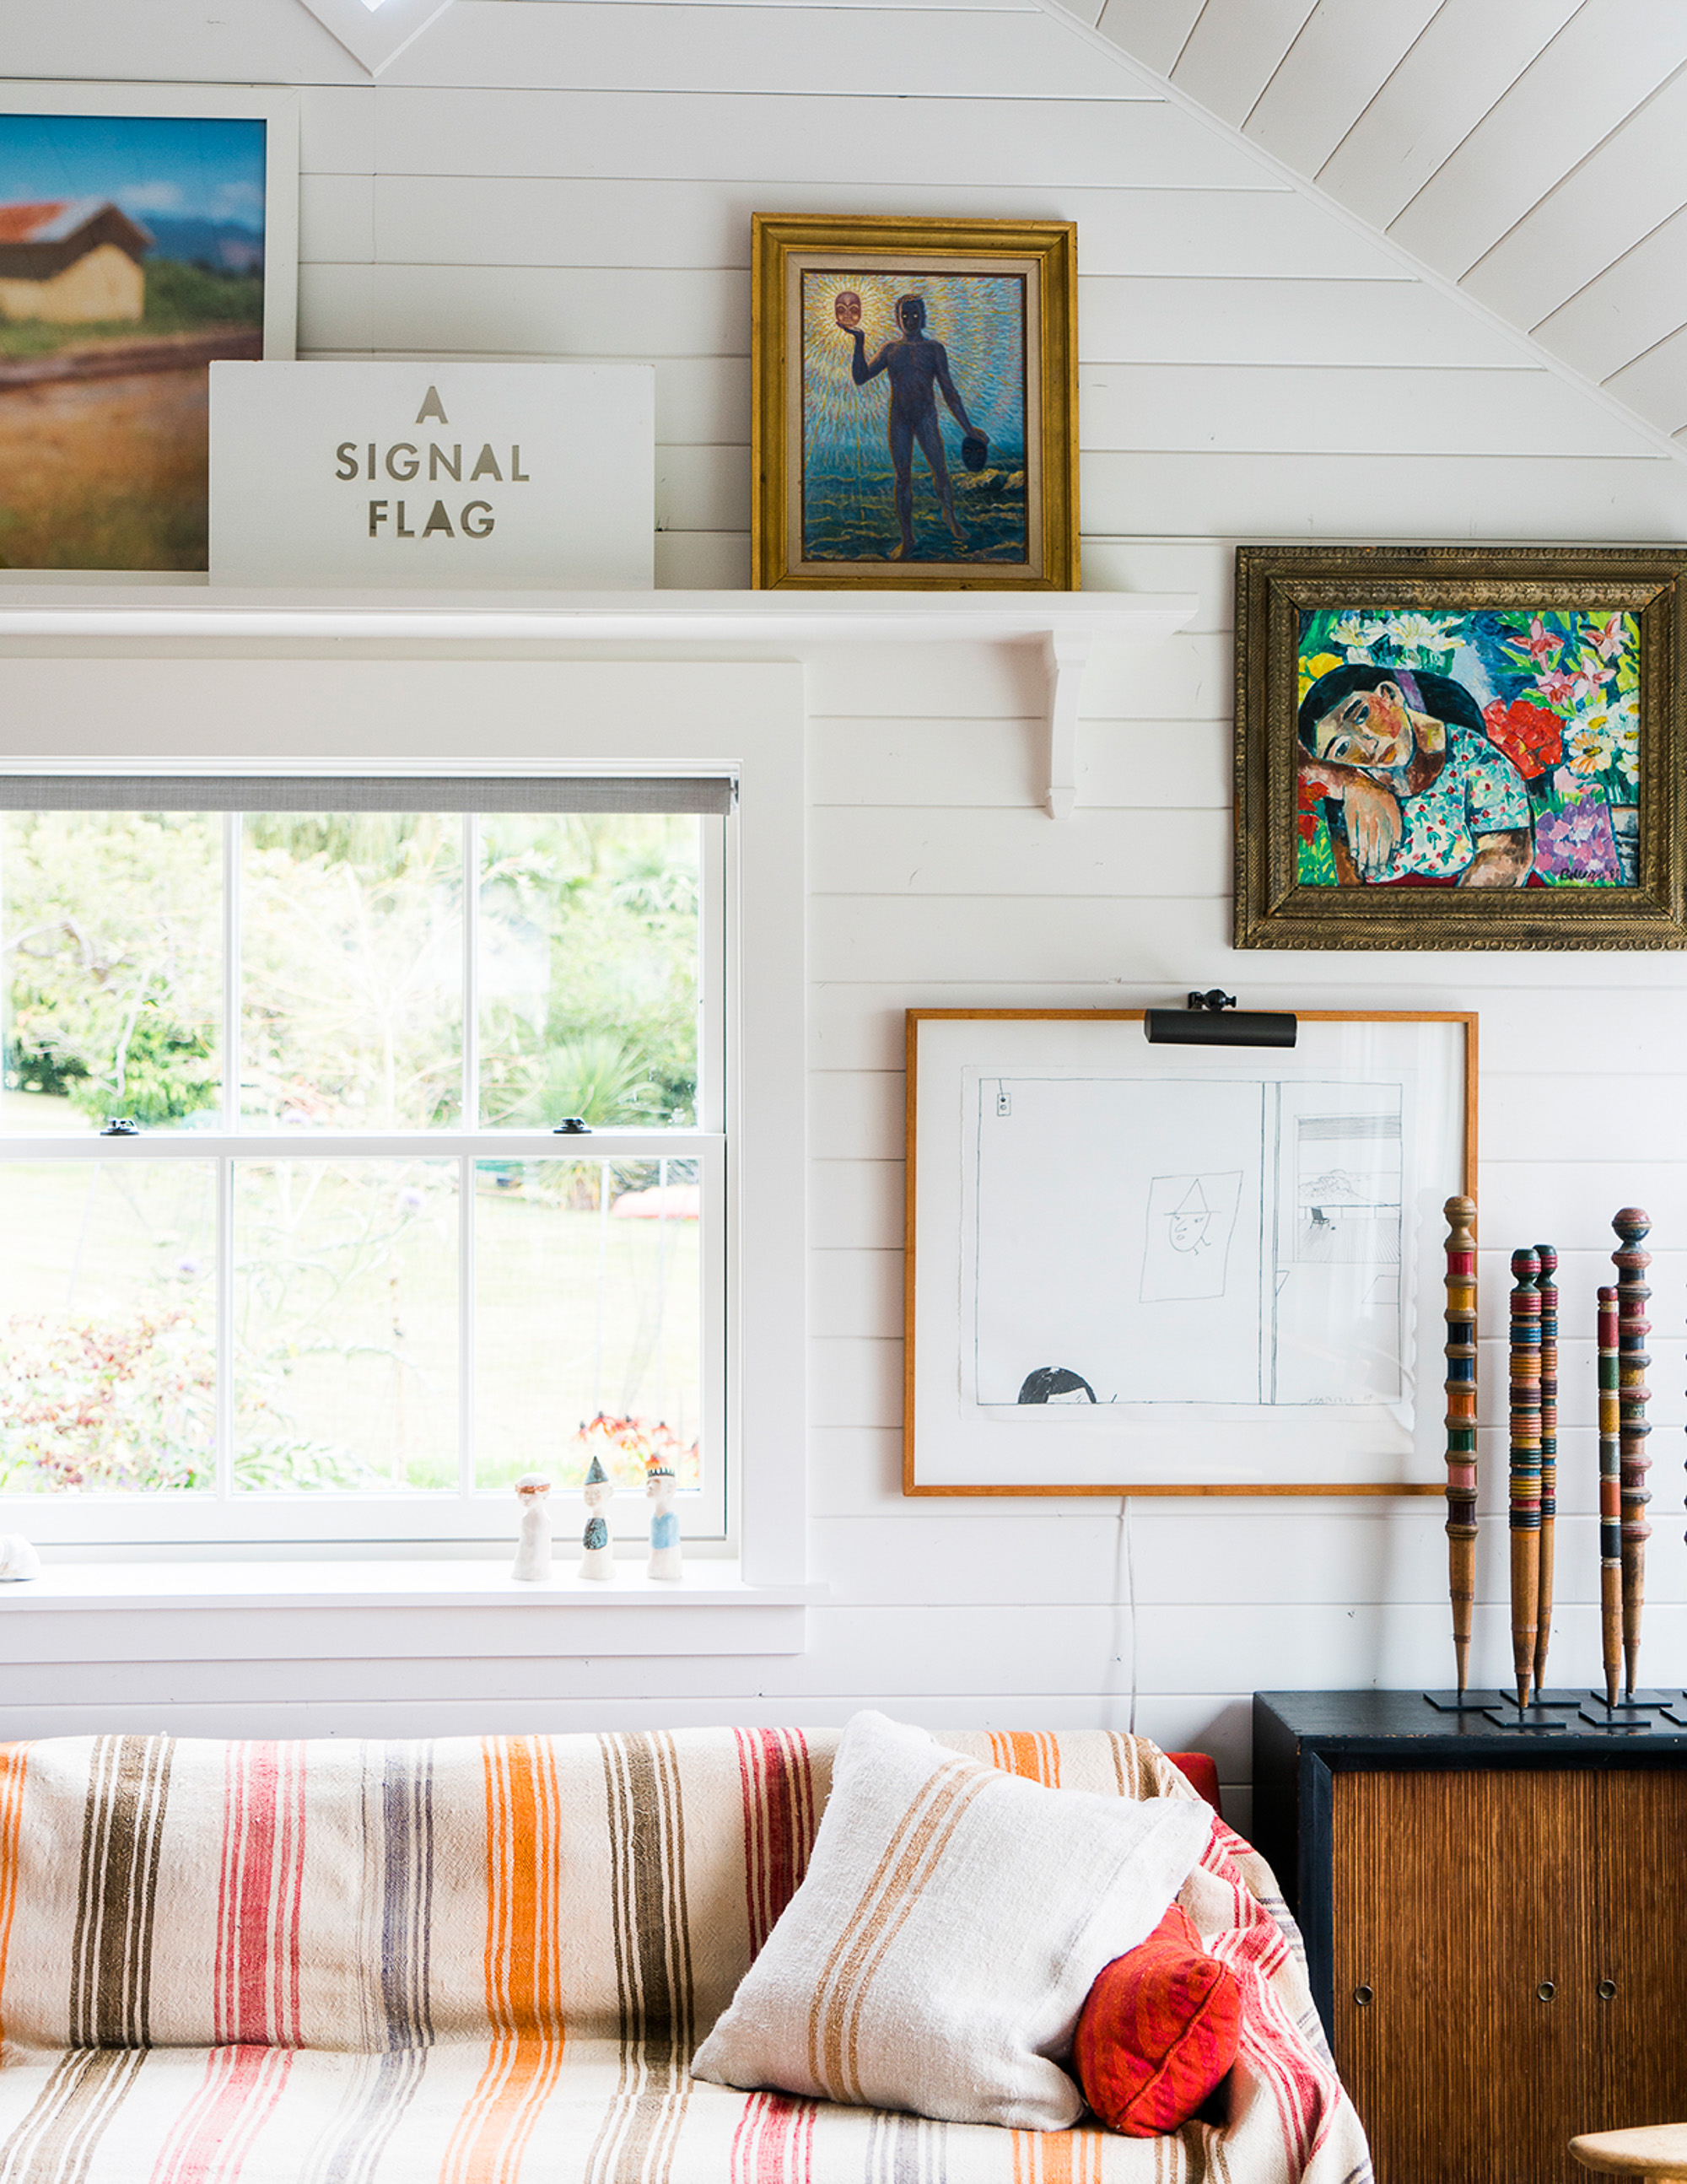 The living room vignette features a cozy sofa covered with a beach blanket, an antique side table with croquet pins, and shiplap white walls adorned with various framed artworks, creating a coastal-inspired and eclectic ambiance.